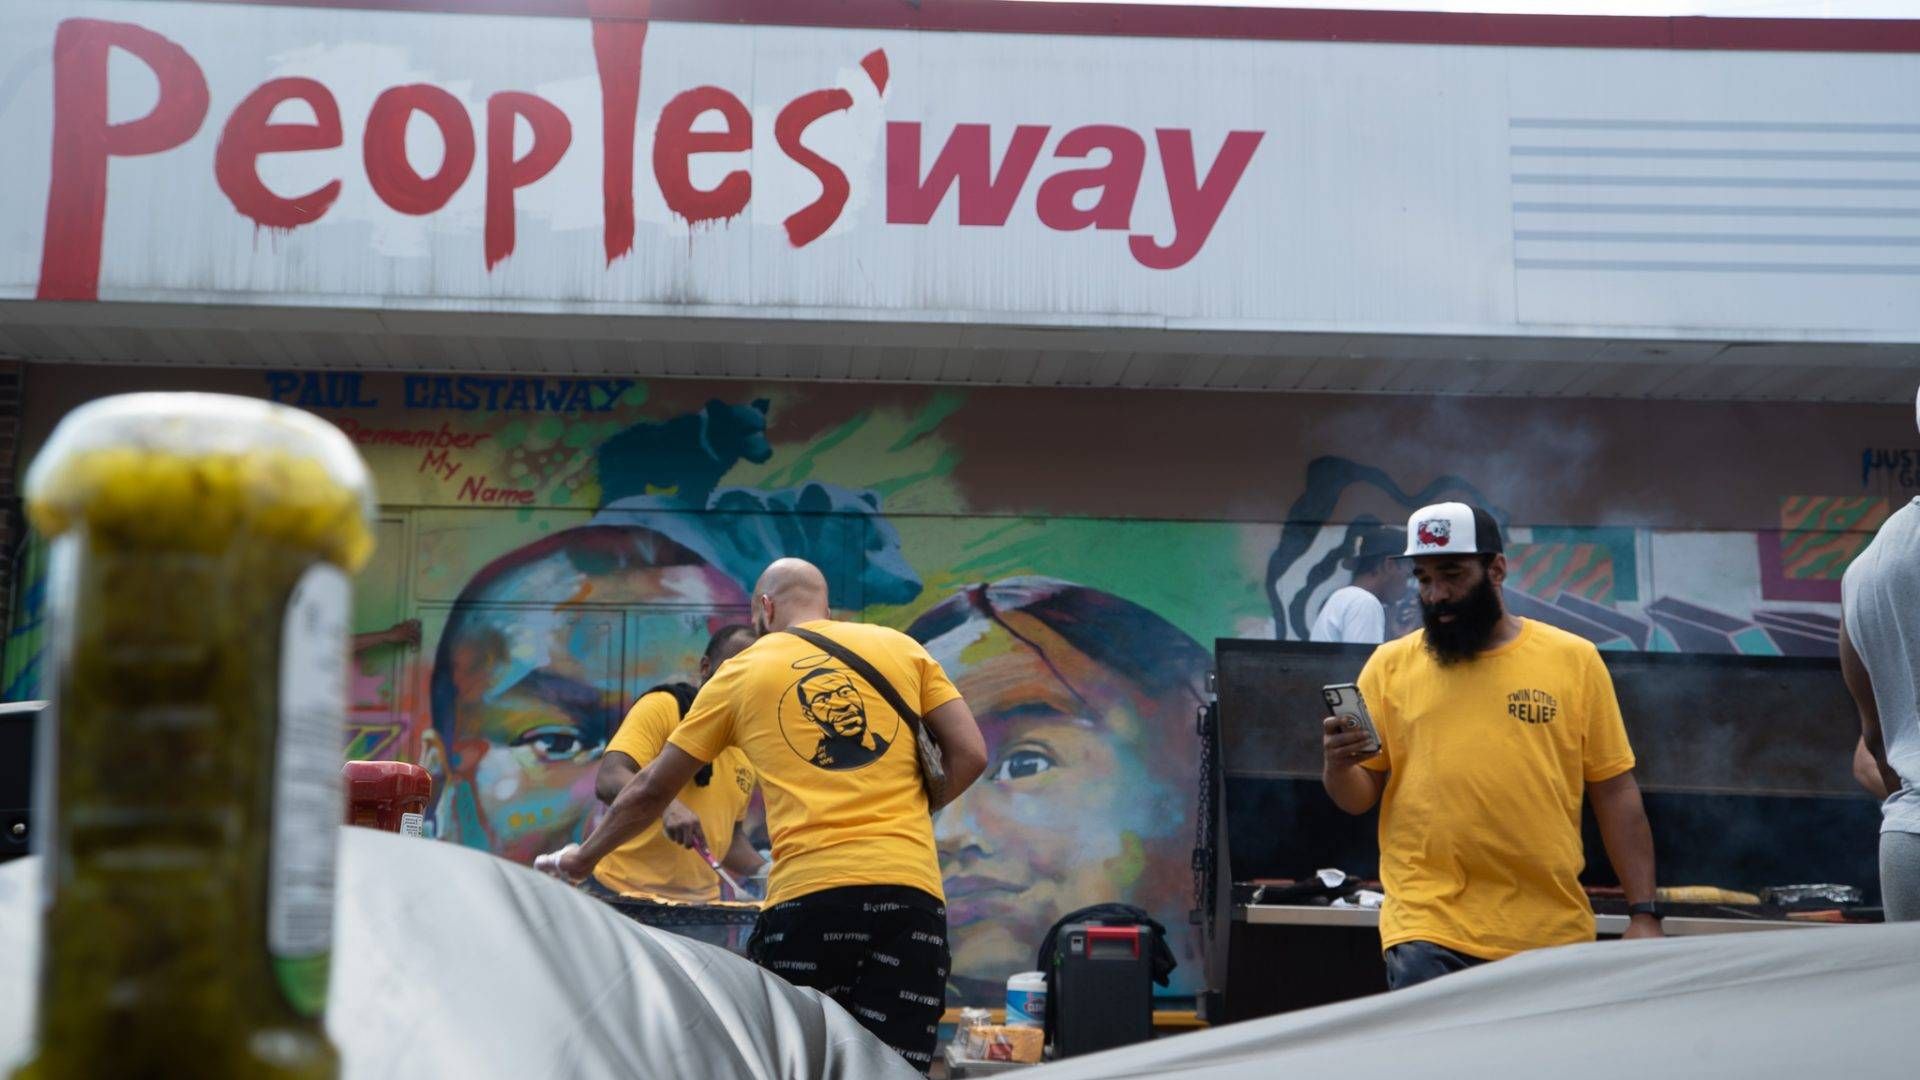 Members of the Twin Cities Relief initiative cook cheese burgers and hot dogs outside of a speedway gas station at George Floyd Square. The gas station has been painted over, reading "People's Way."